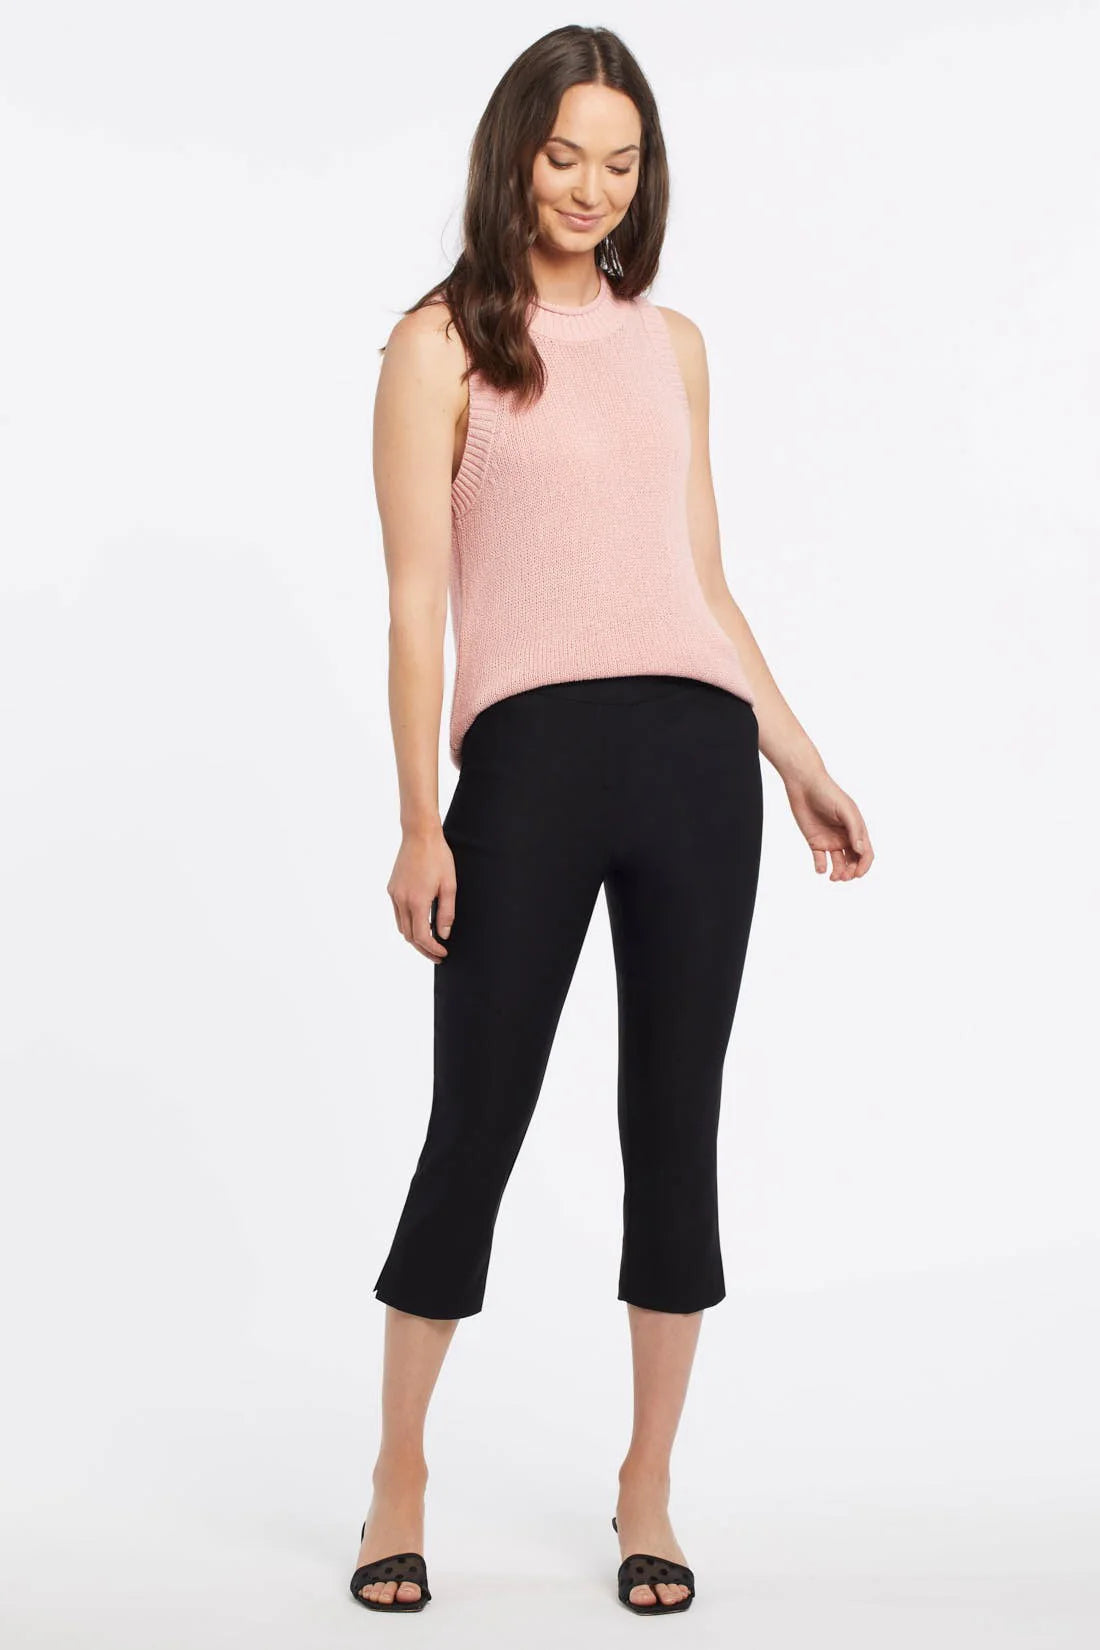 There's a reason these chic capris are one of our best-selling pieces--from the tummy slimming FLATTEN IT® technology to the pull-on waist, signature Century Stretch twill fabric and pocket details. These ultra-flattering 22" pants are made to take you through your day, or night, in comfort and style.